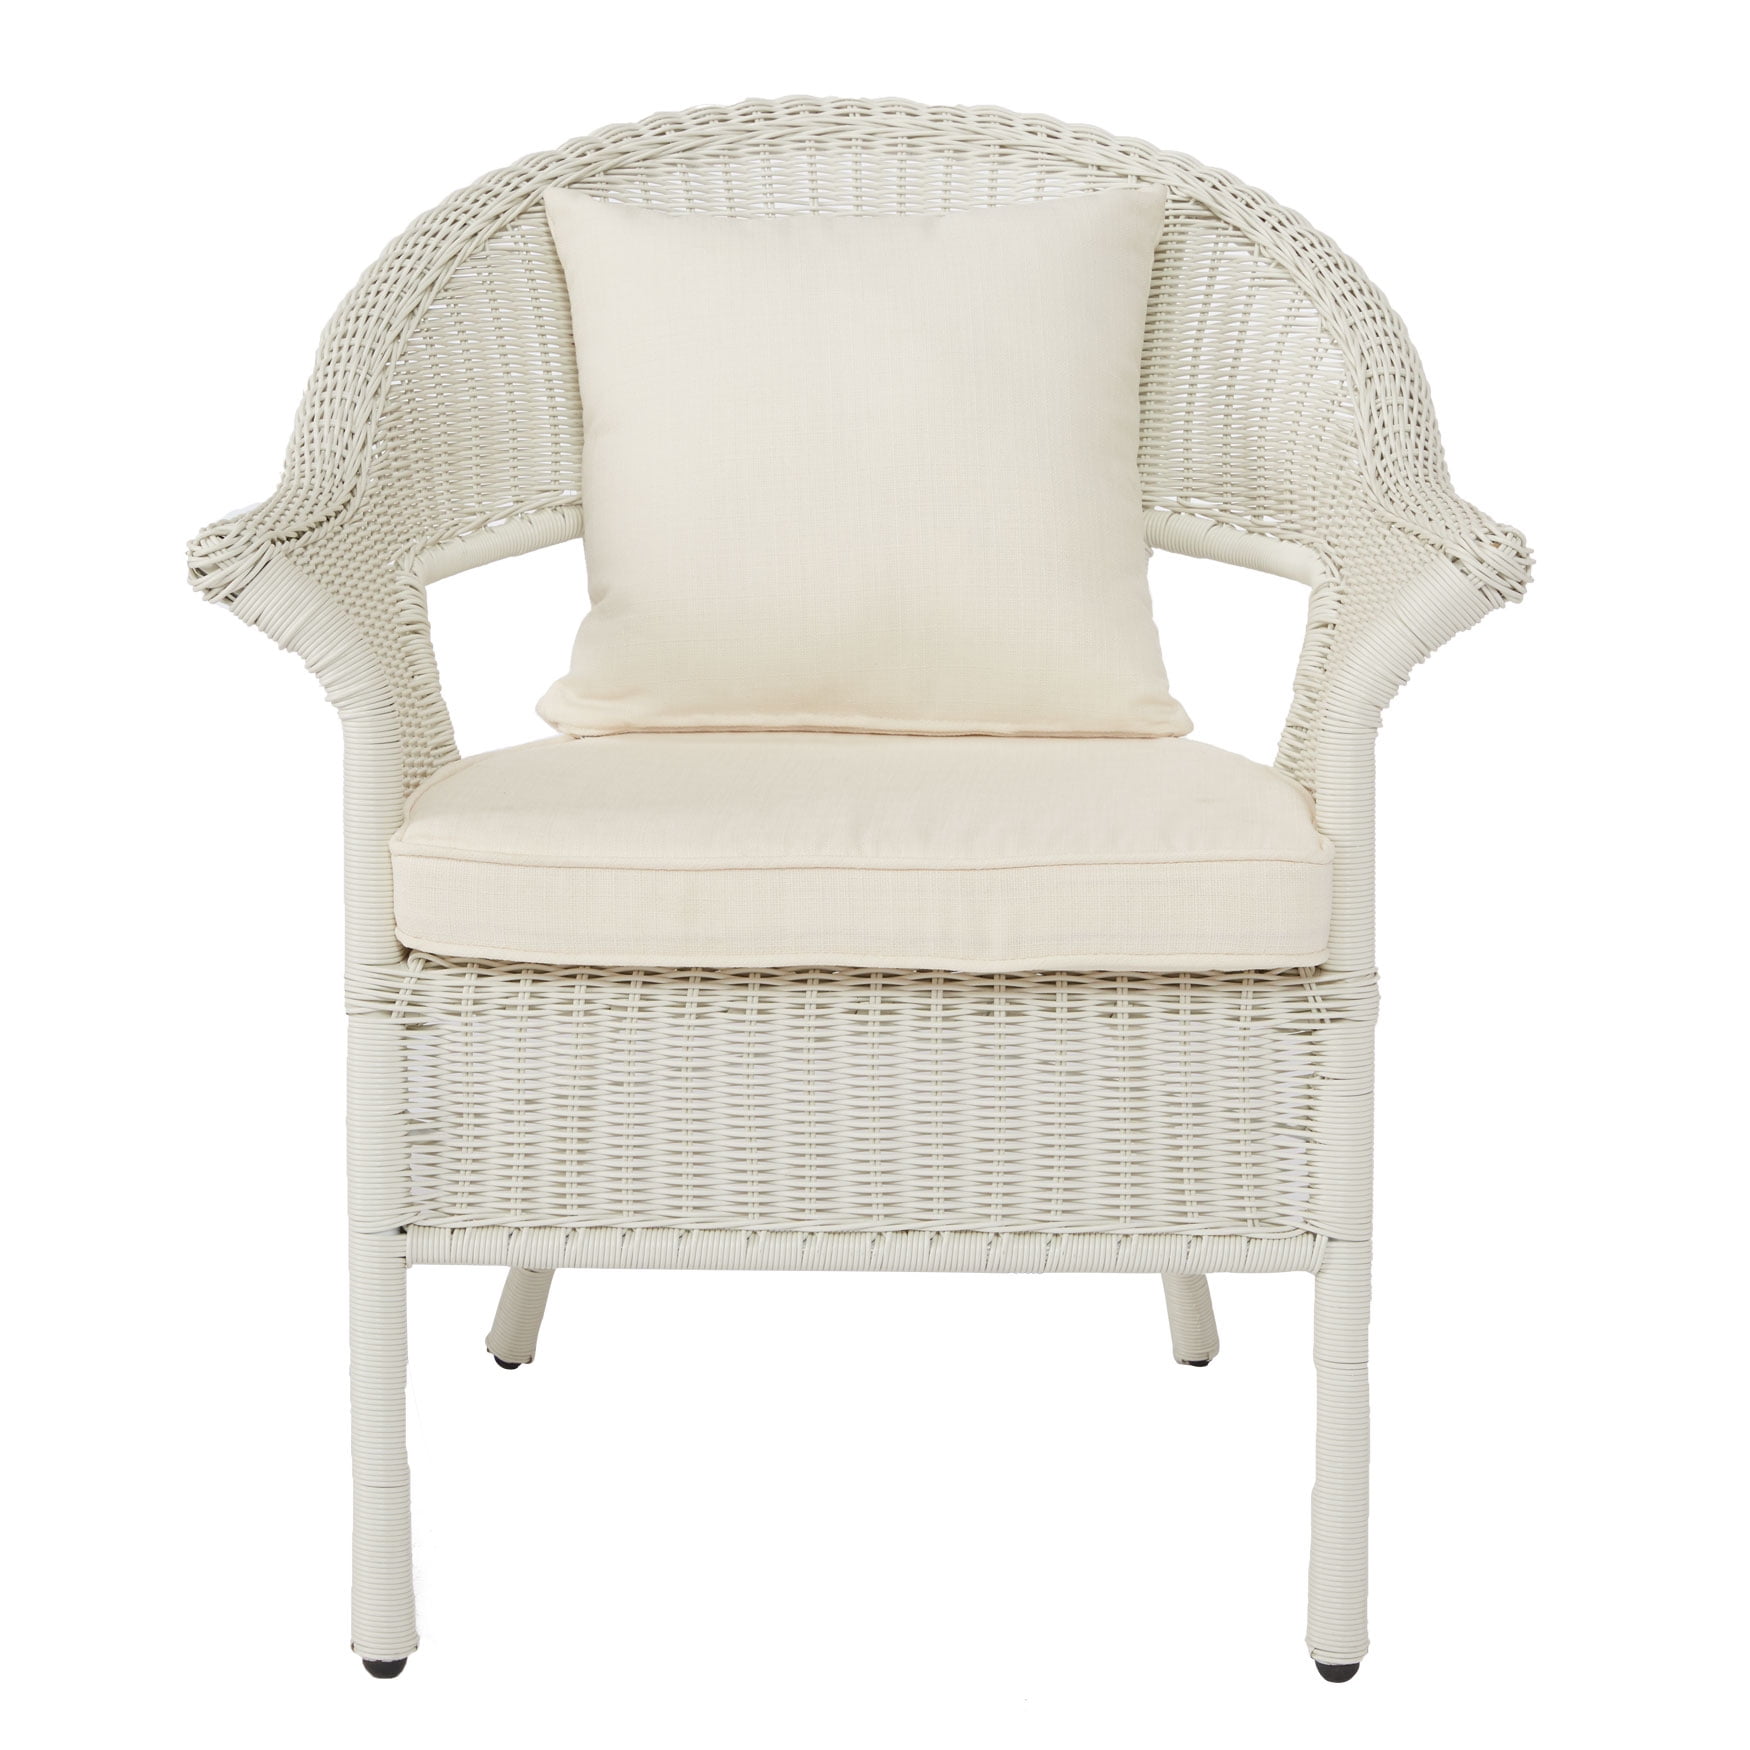 White all weather wicker chairs